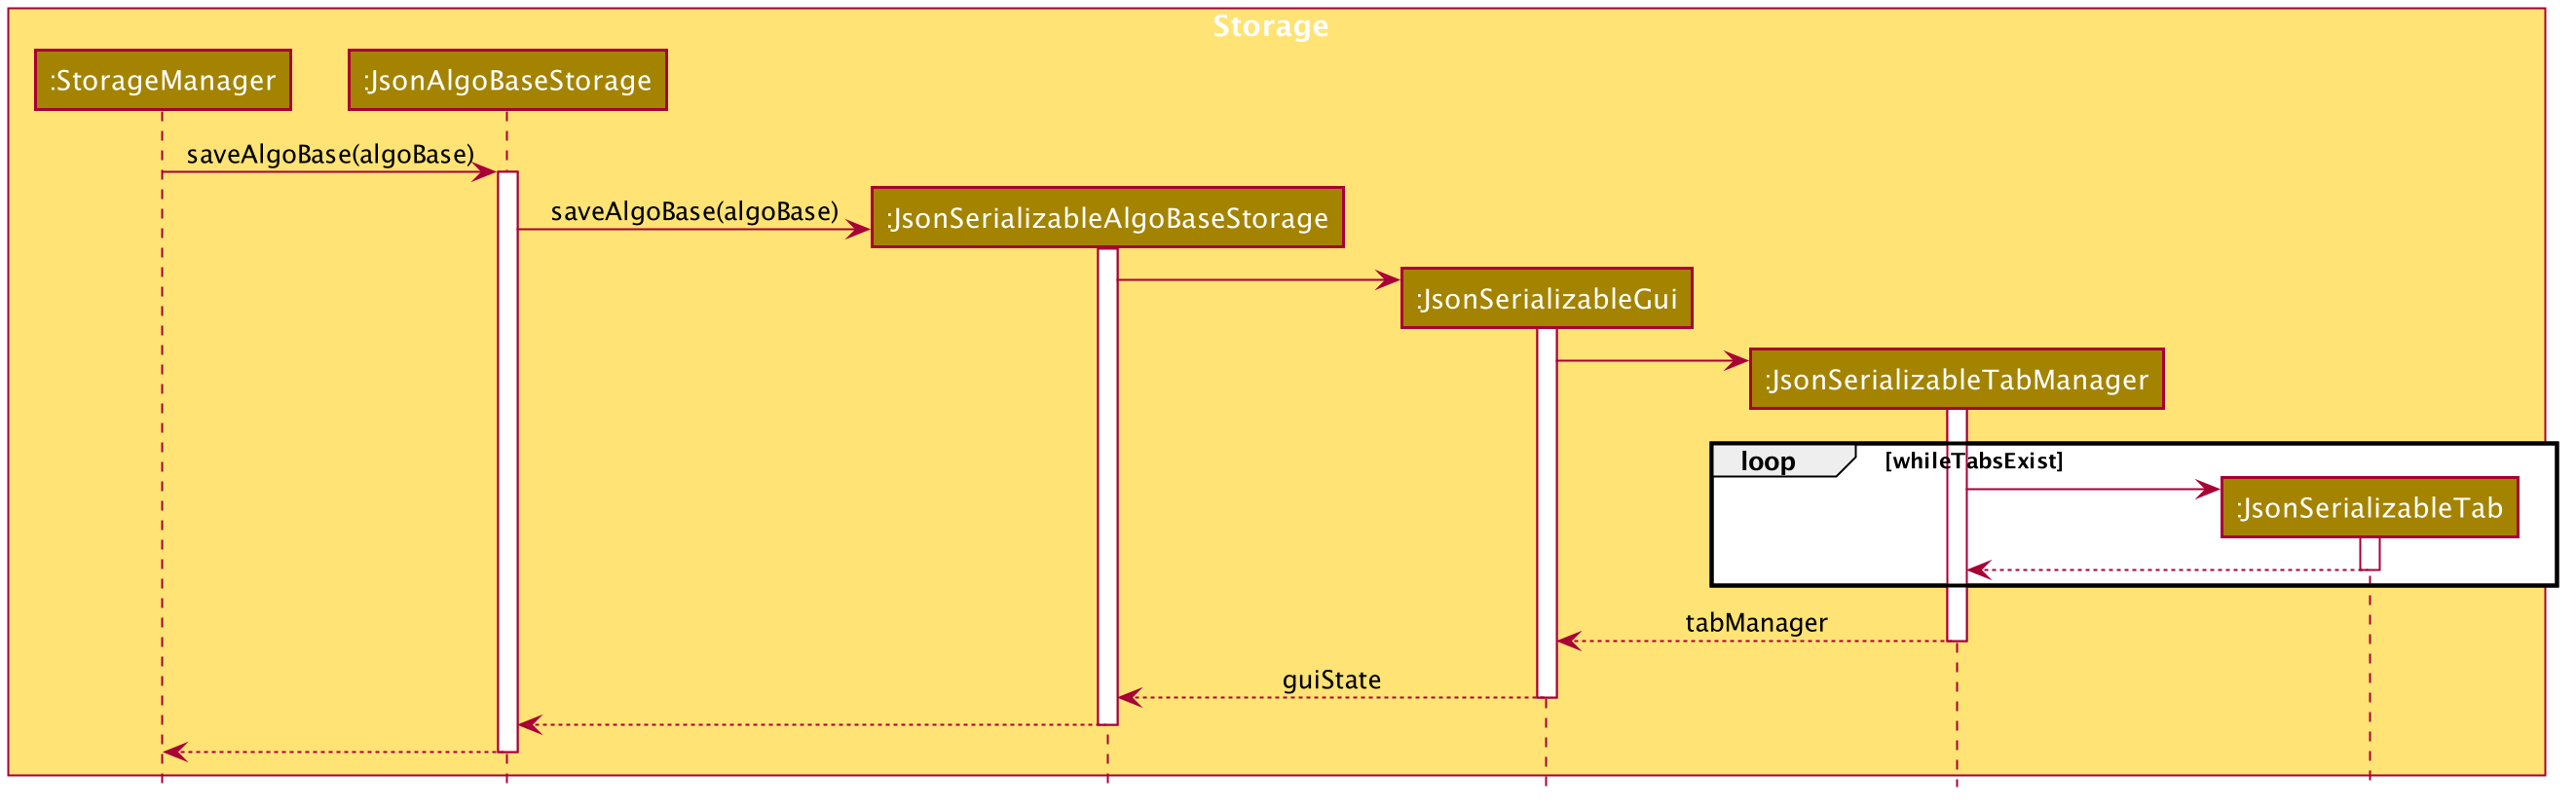 SwitchTabsSequenceDiagram3